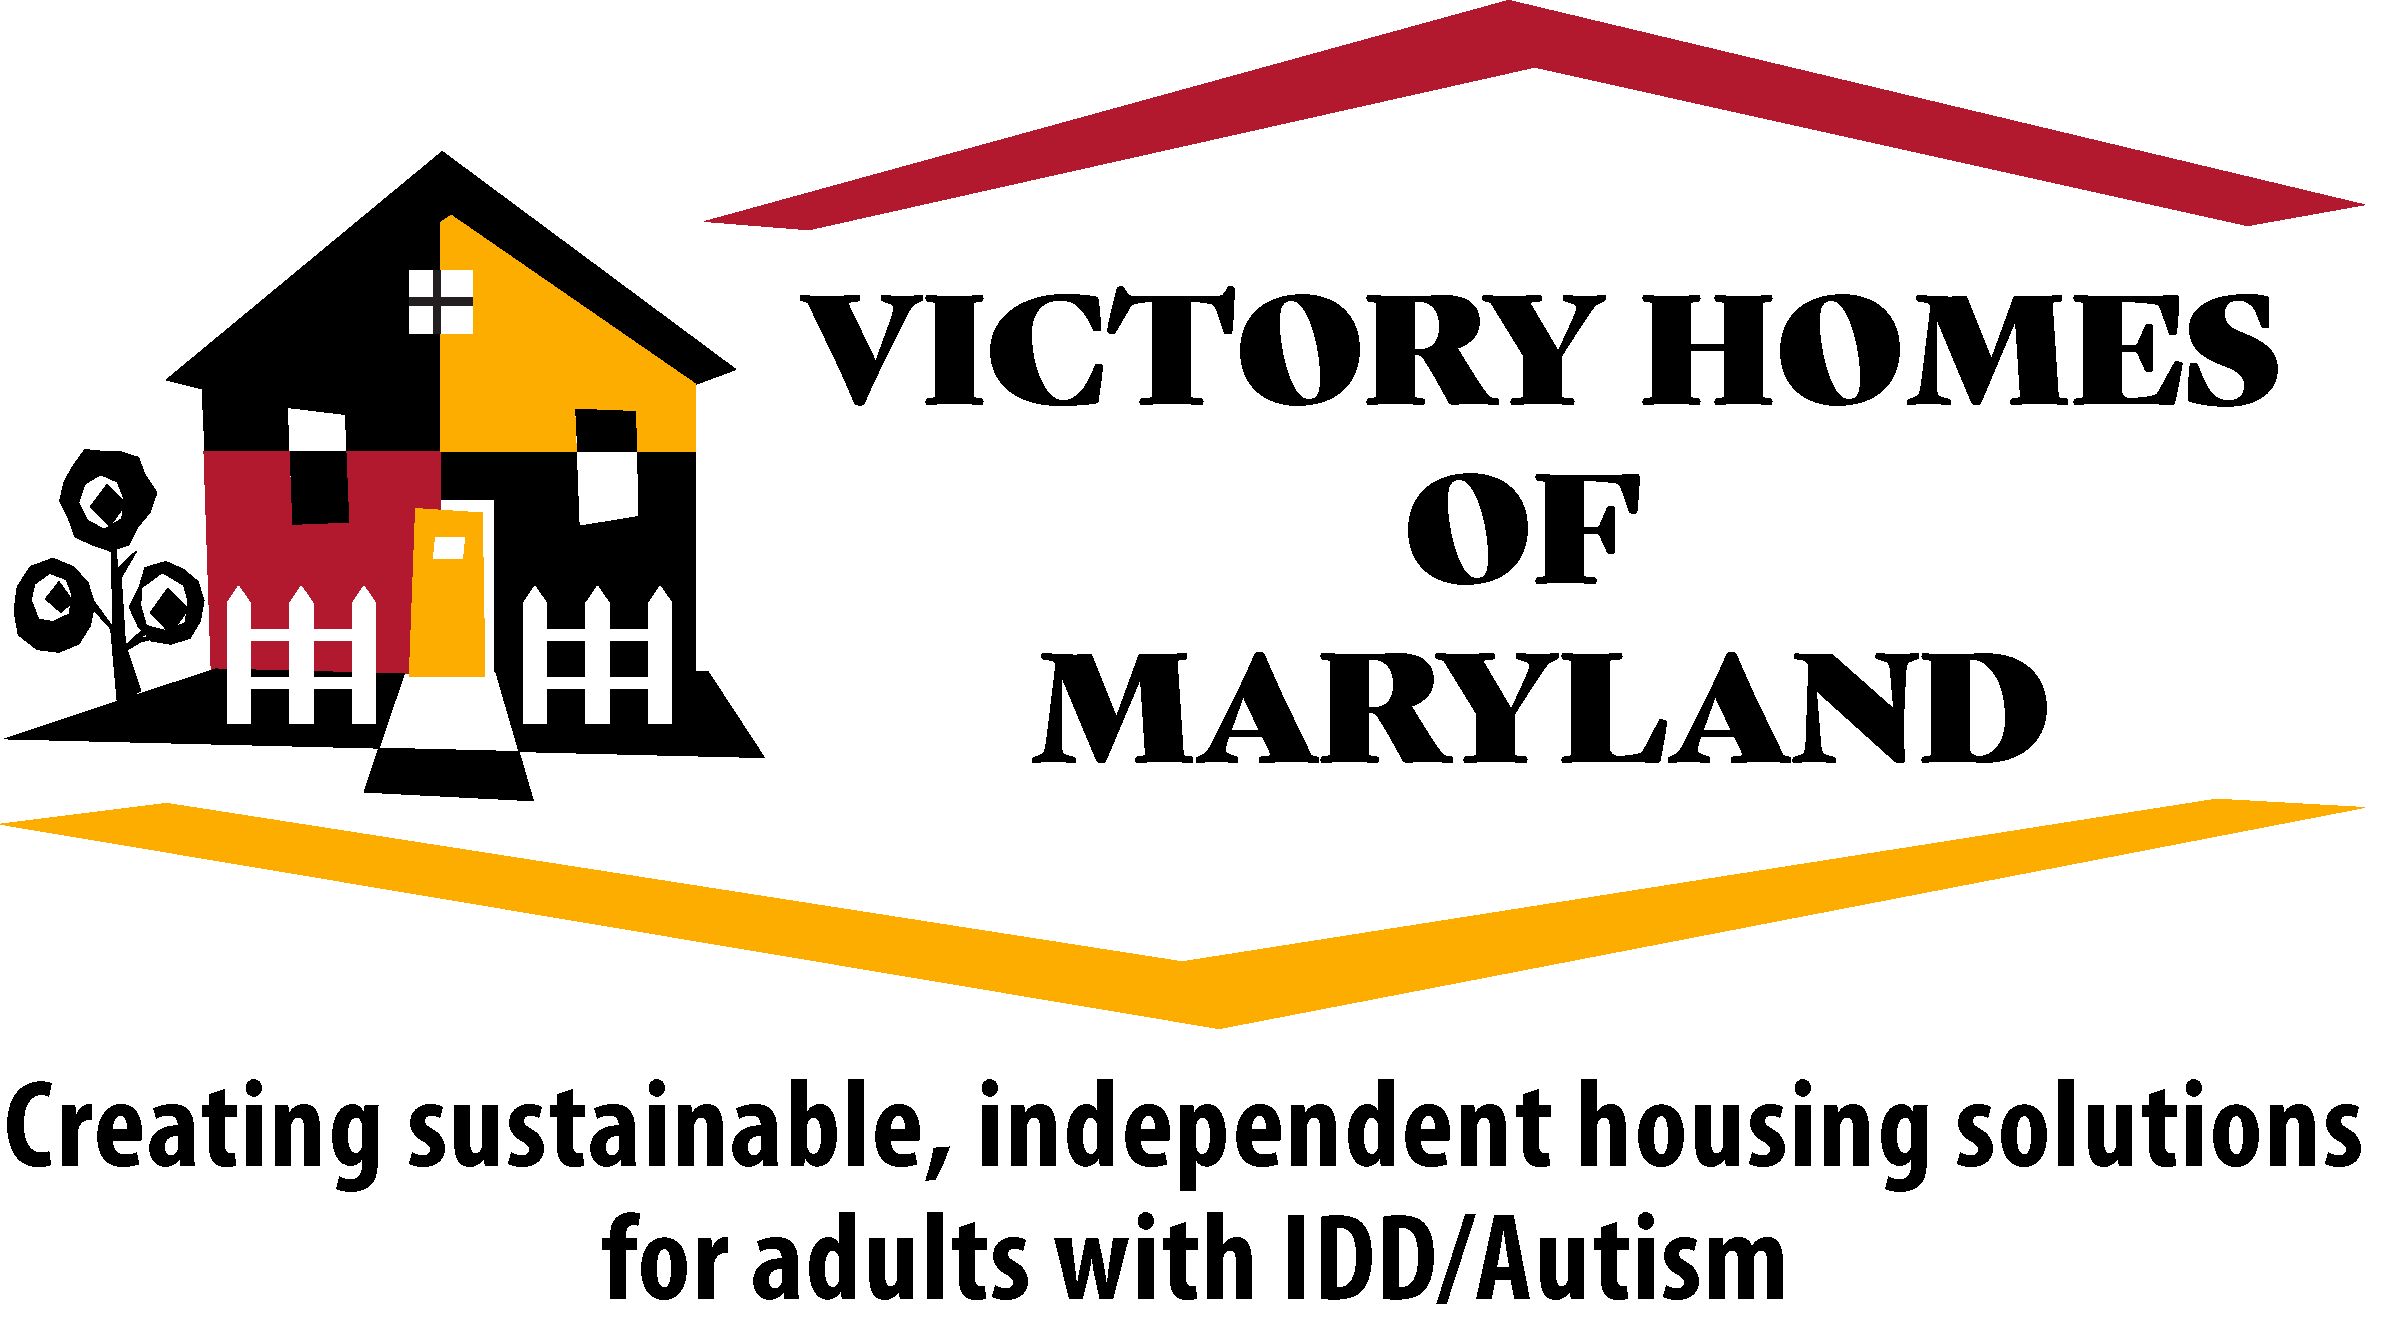 Victory Homes of MD | Housing for Adults with IDD/Autism in MD